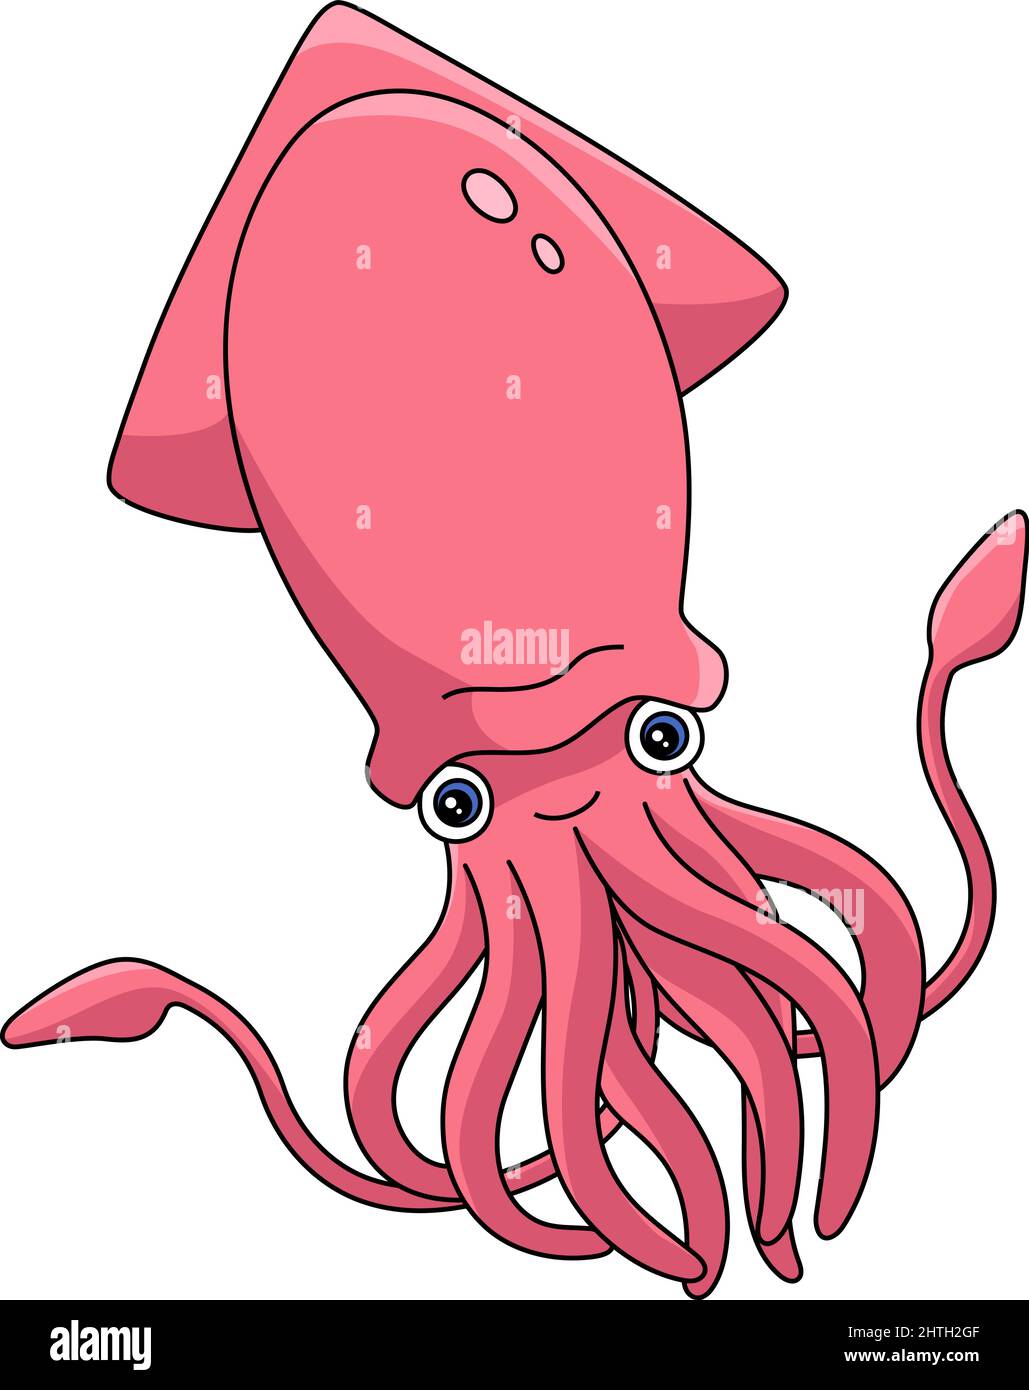 Giant Squid Cartoon Colored Clipart Illustration Stock Vector